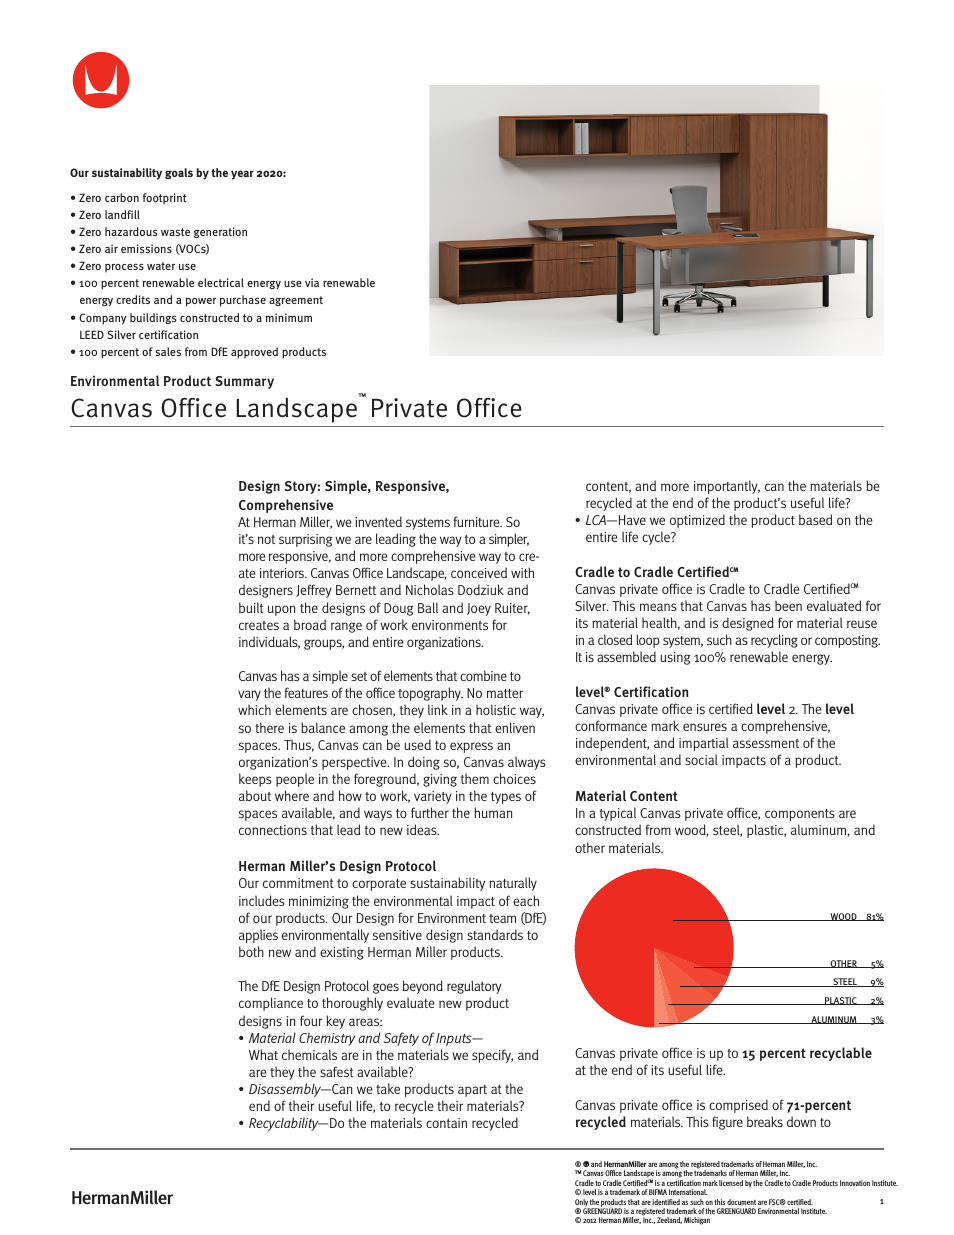 Canvas Office Landscape Private Office - Environmental Product Summary